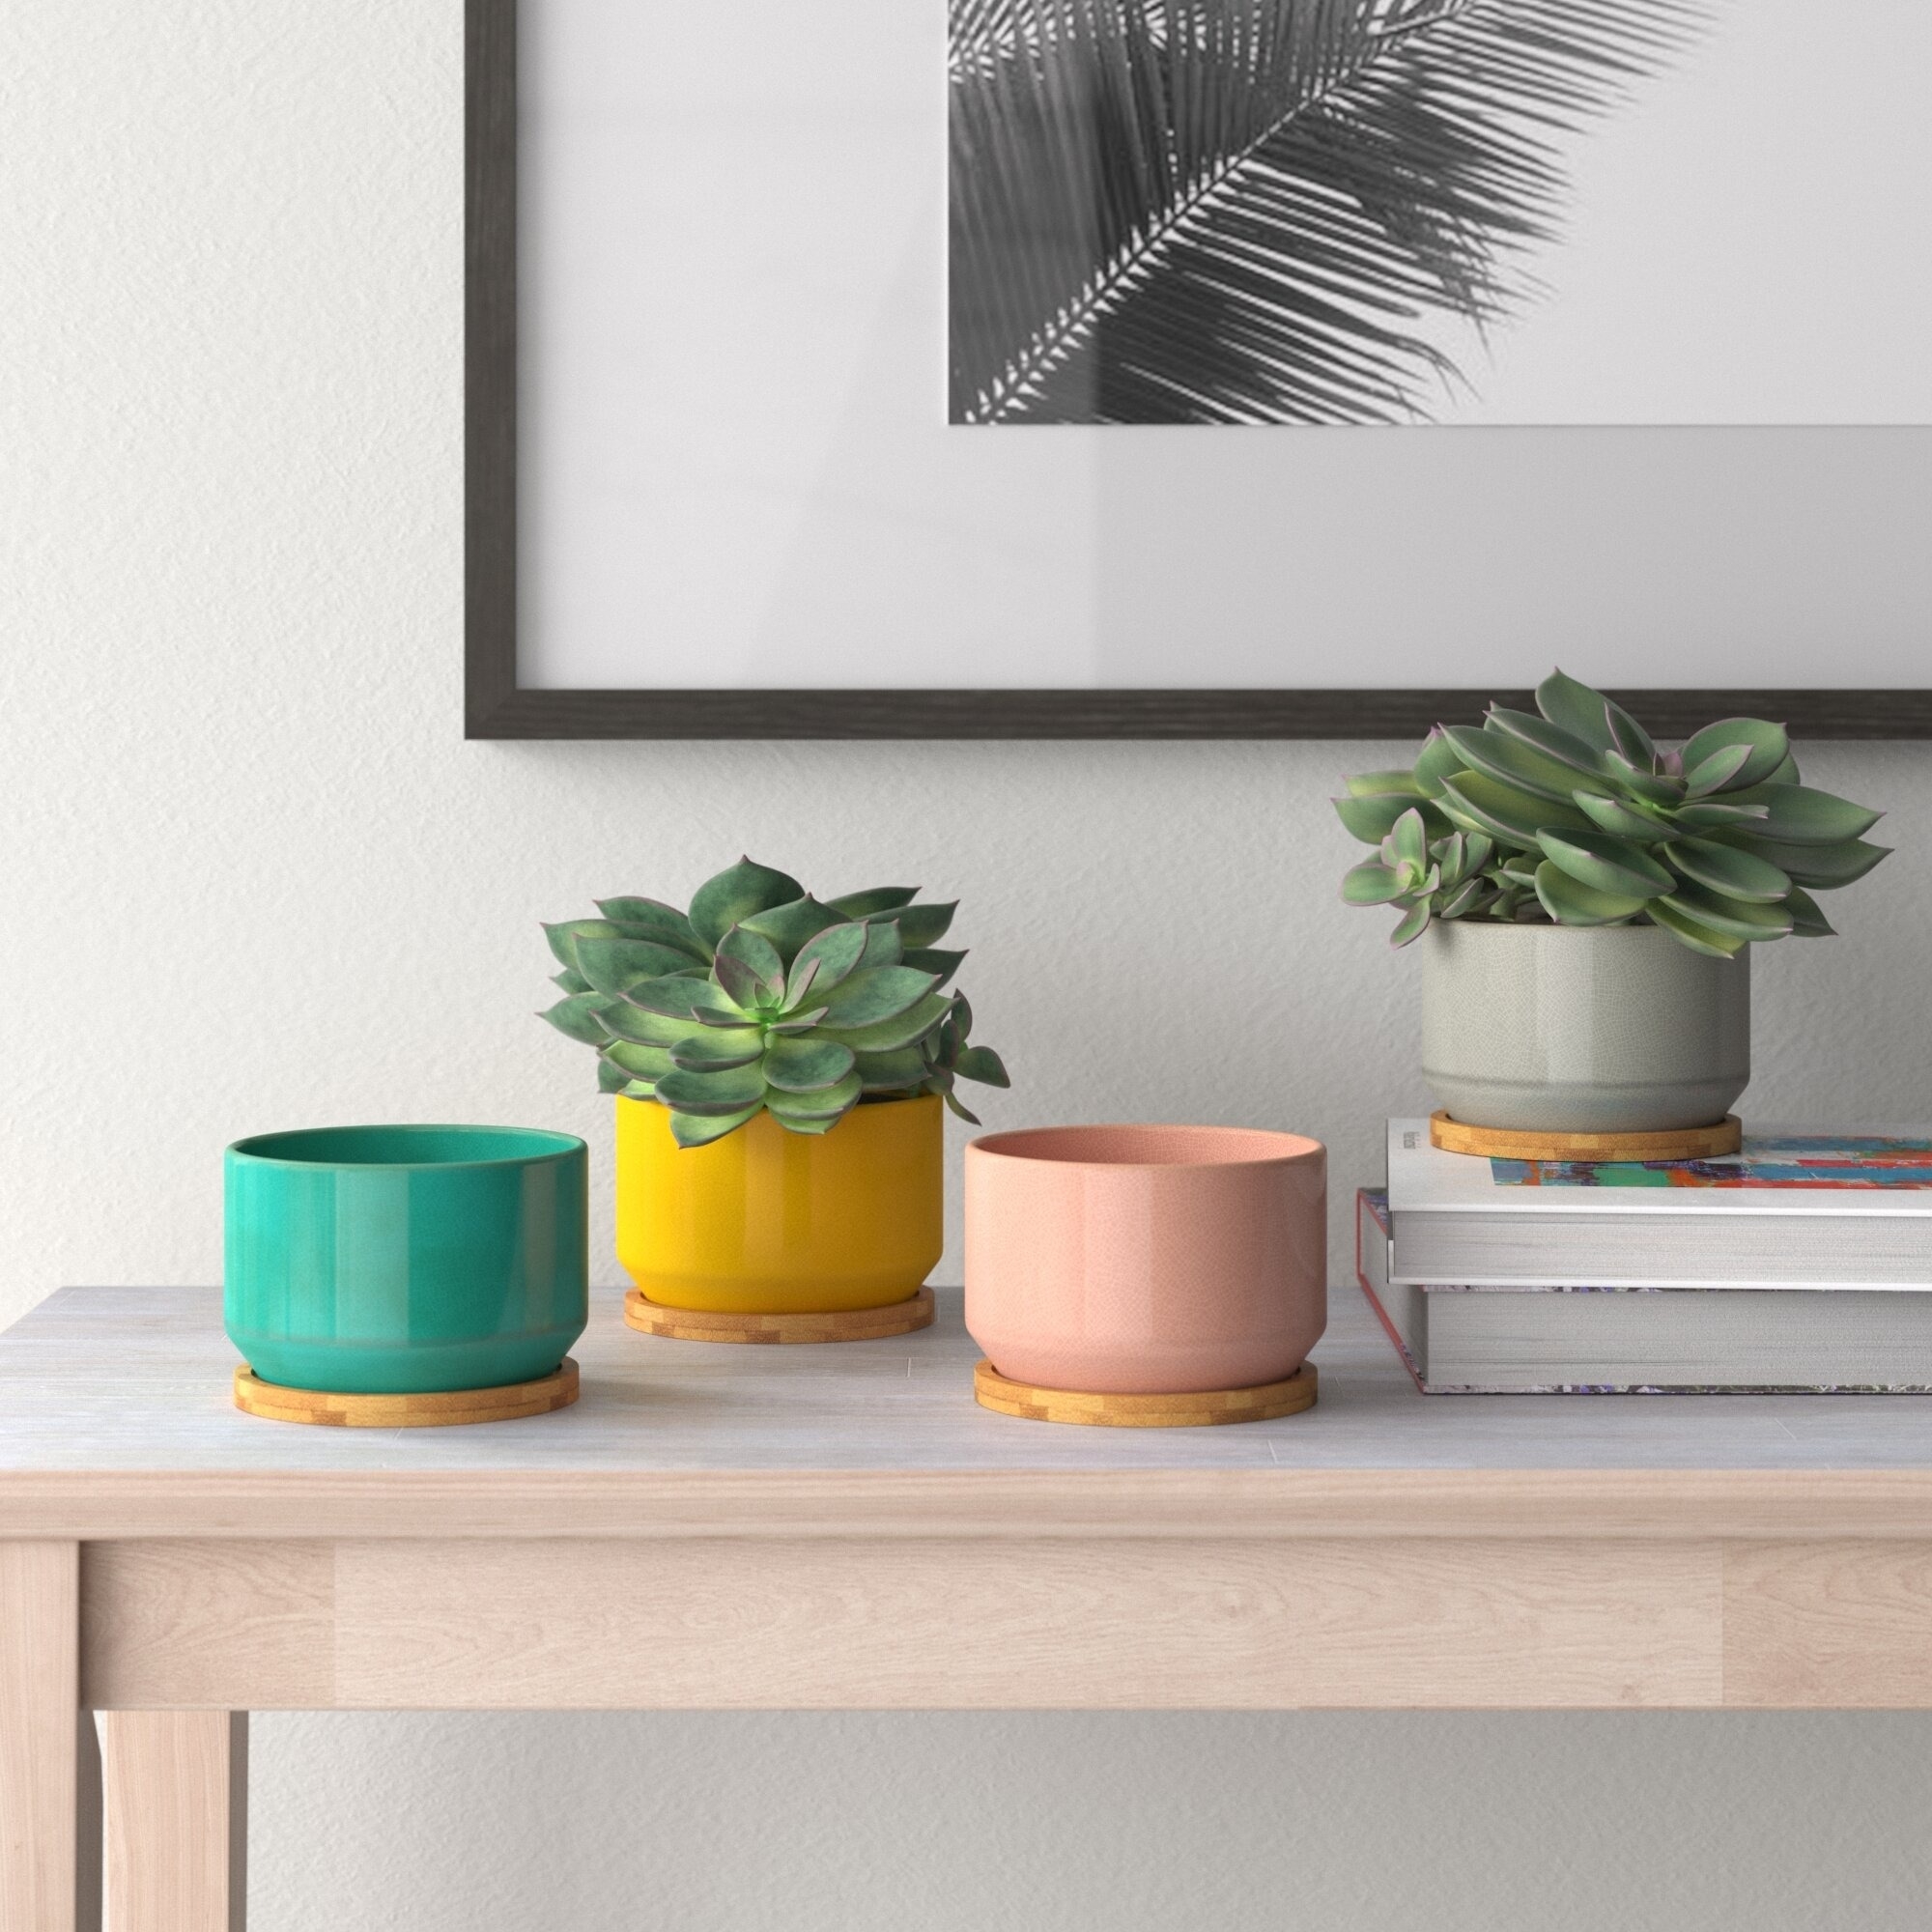 Three potted succulents on a shelf, with a framed picture above and books beside them